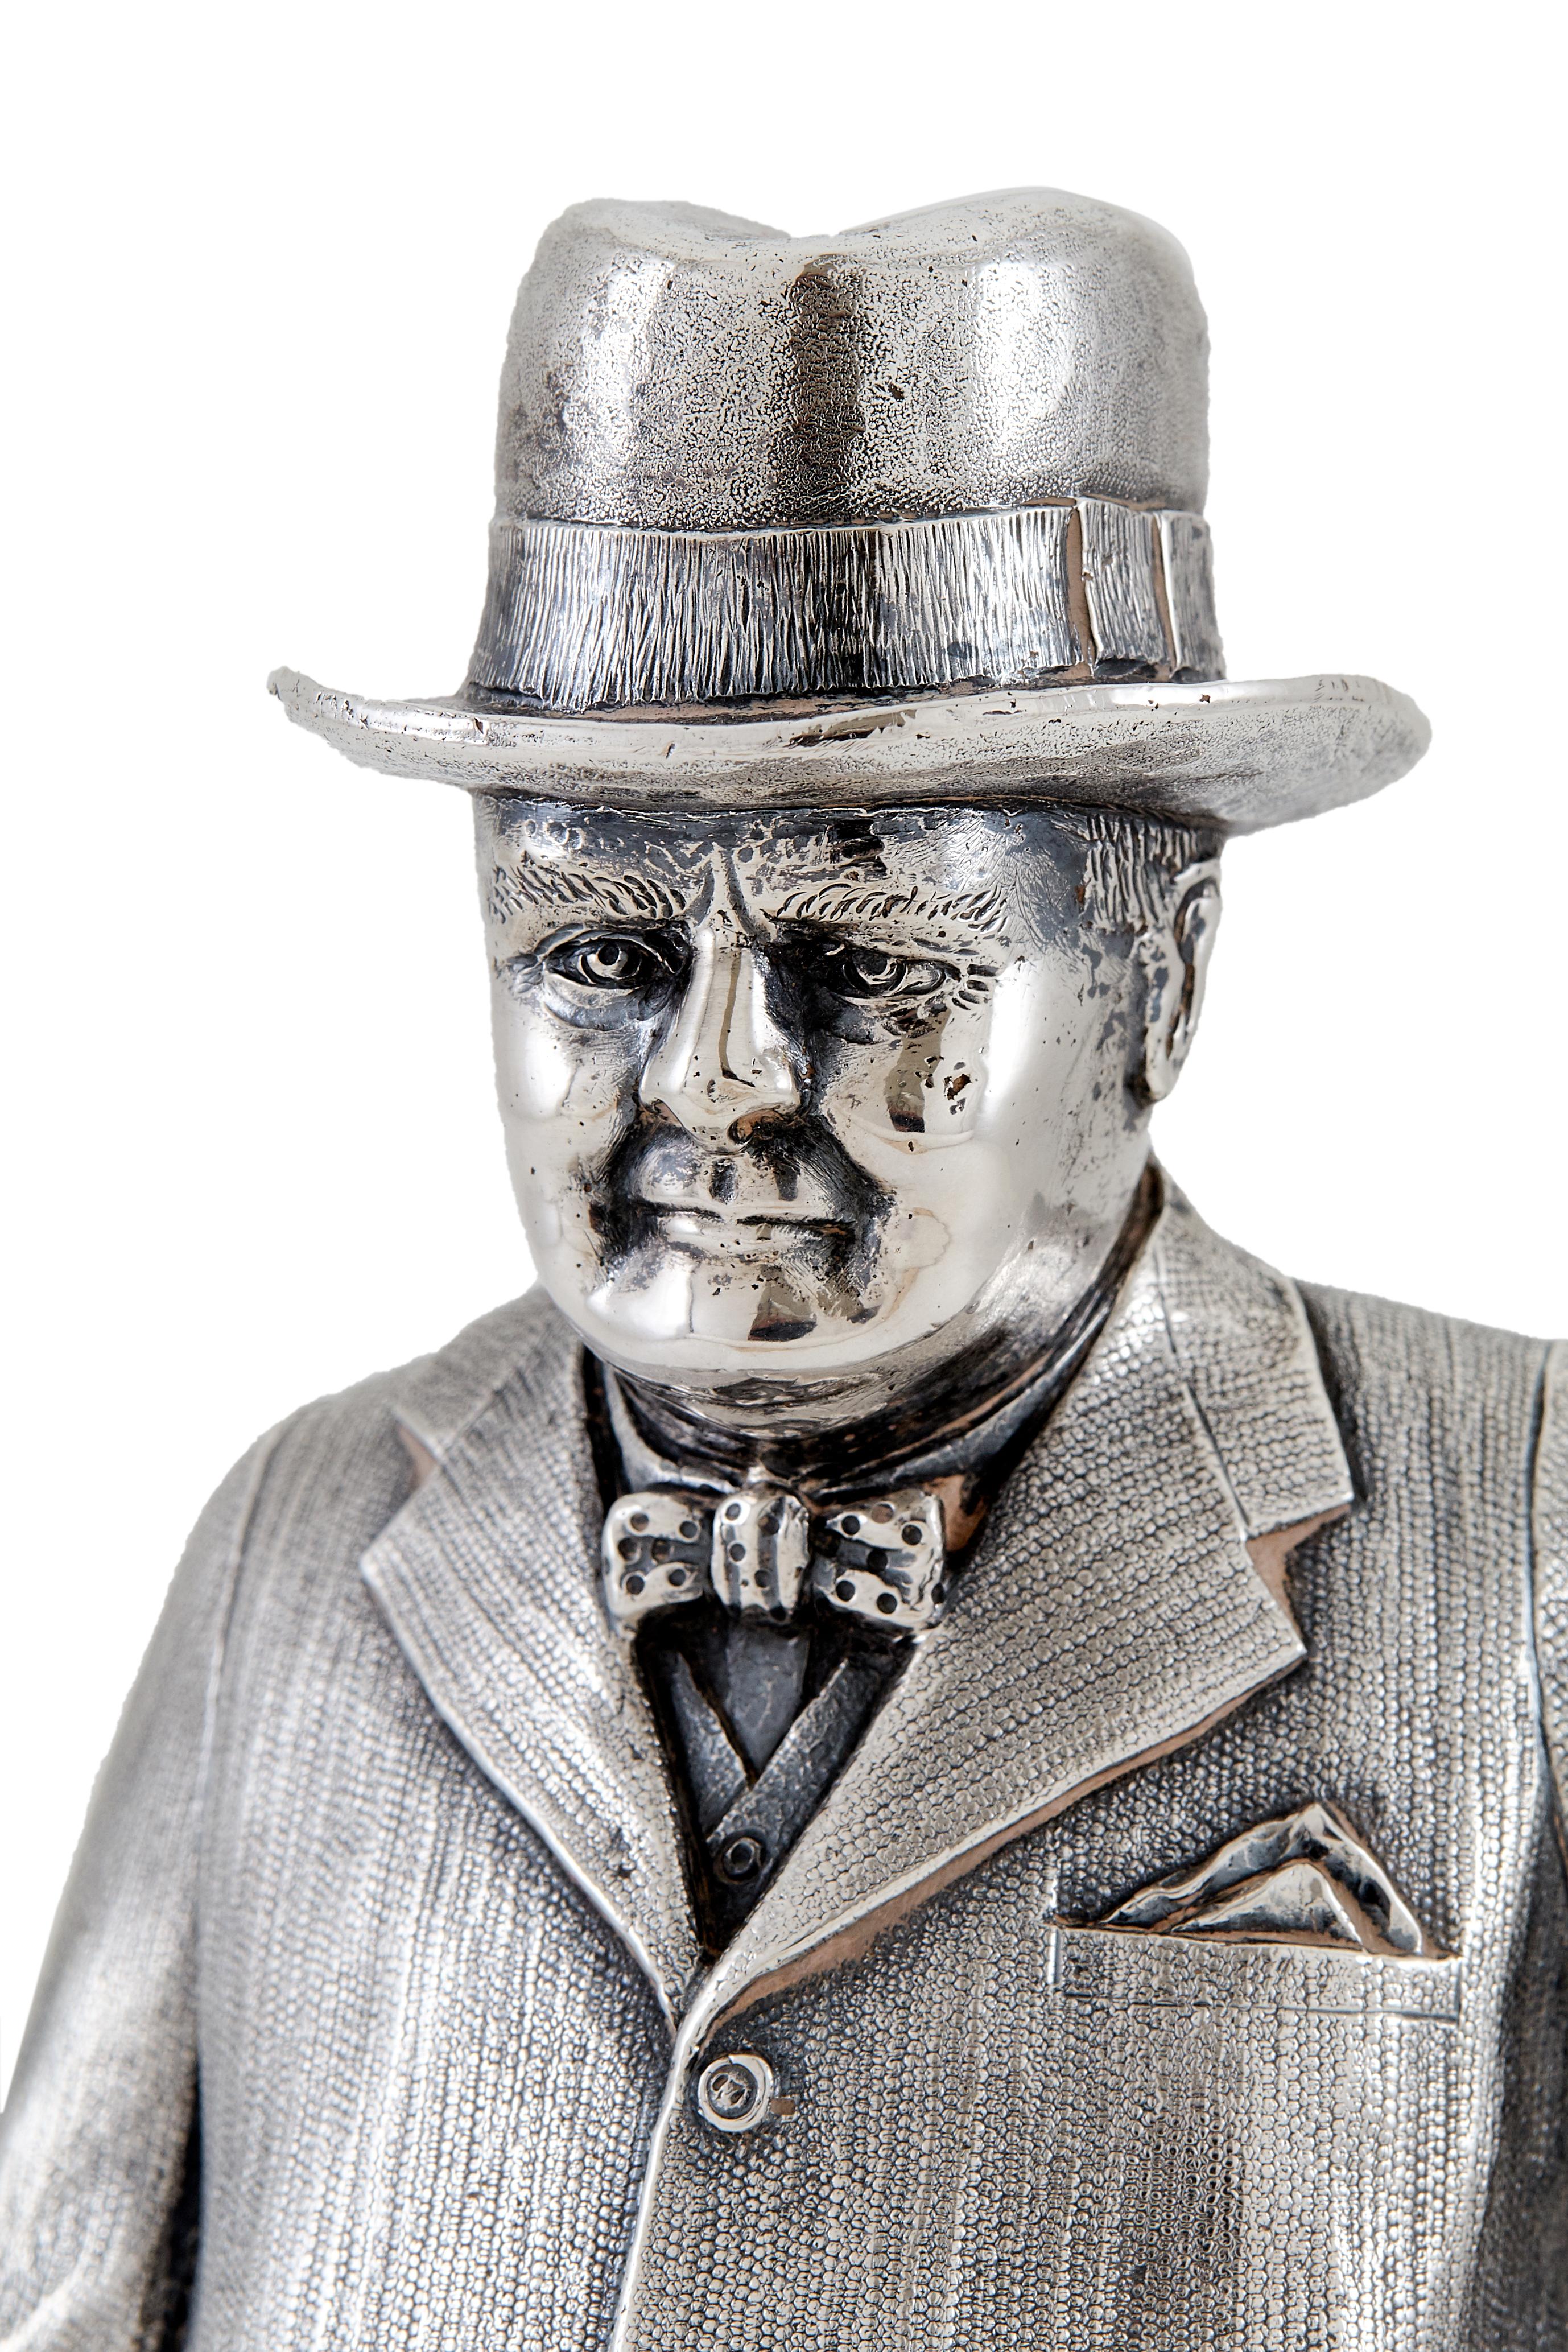 Extremely Heavy Cast Silver Statuette of Prime Minister Winston Churchill 1